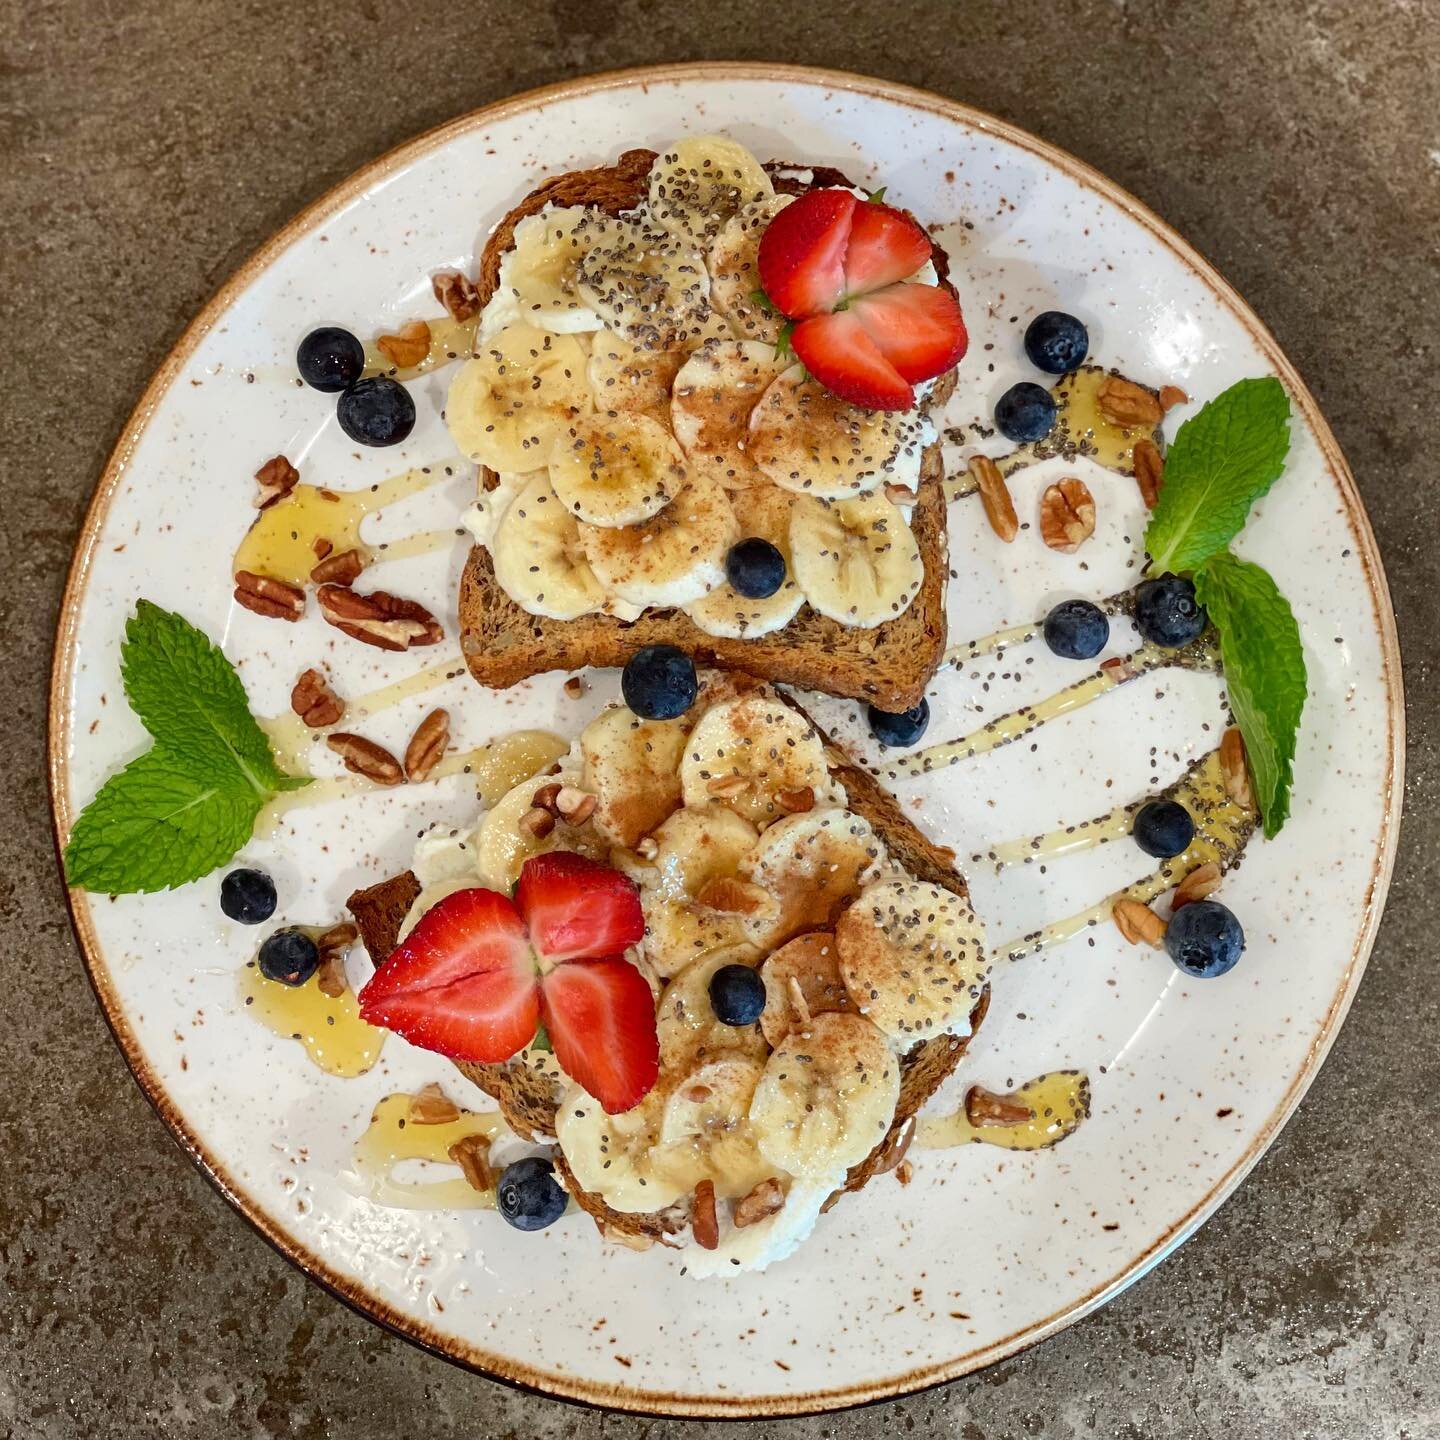 &lsquo;Nanas&rsquo; on toast - toasted hippie loaf with ricotta, honey, banana, chia, cinnamon, walnuts and fresh berries #yelptop100 #friscofoodie